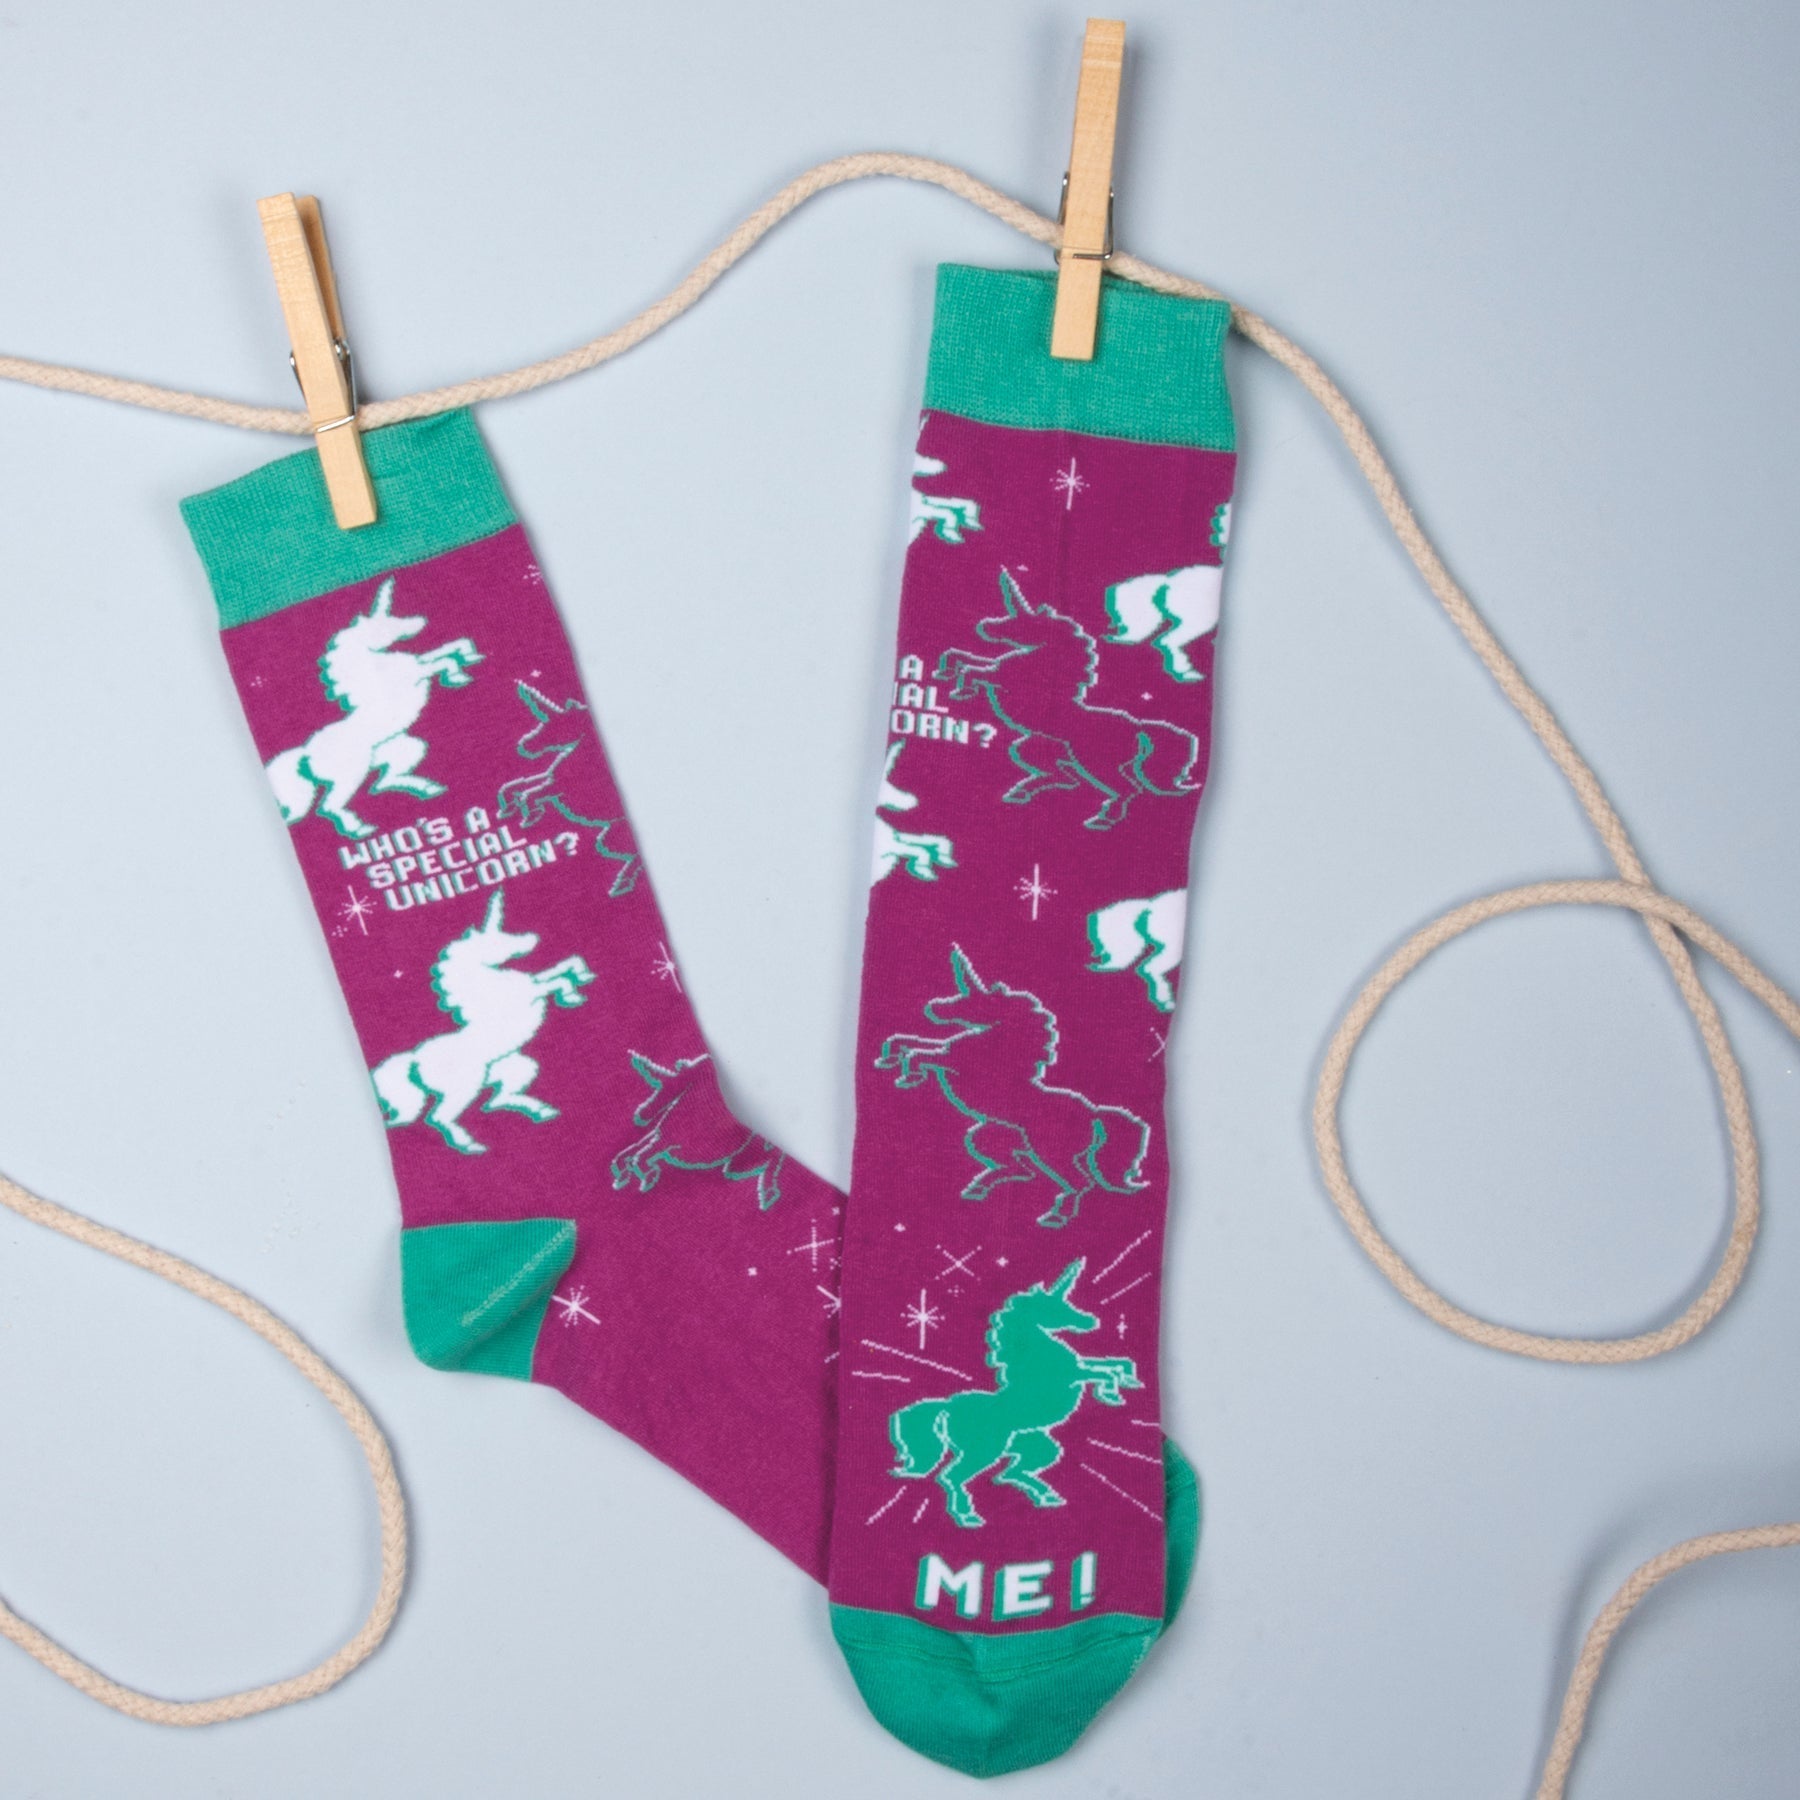 Who's A Special Unicorn? Me! Colorful Funny Novelty Socks